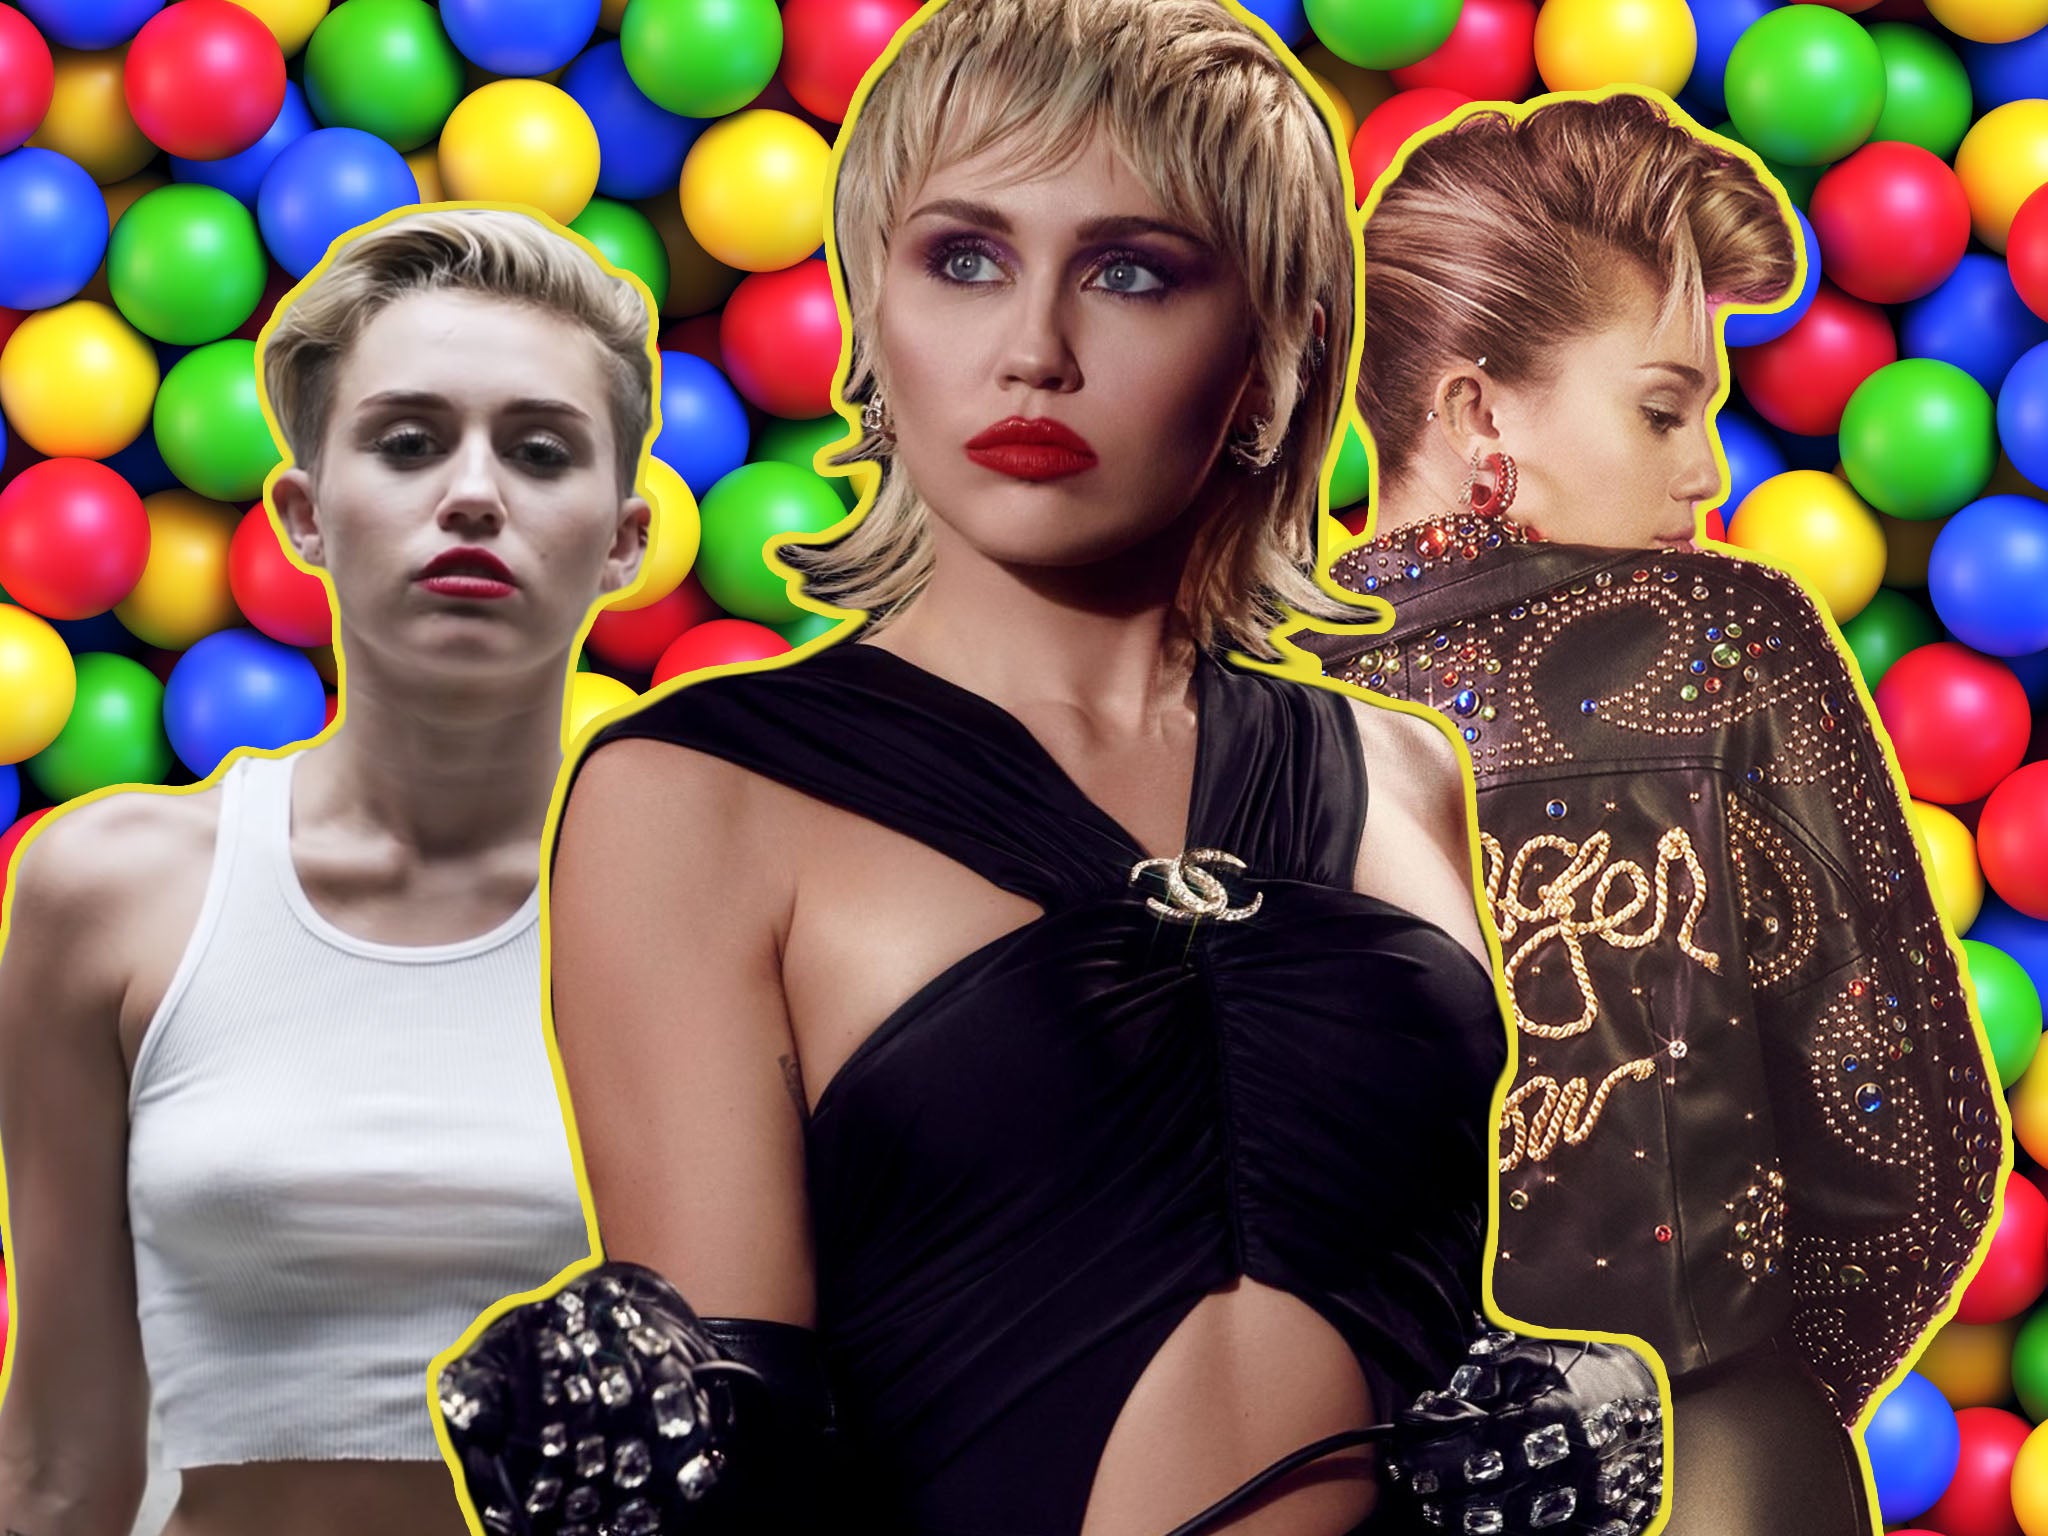 Miley Cyrus, who’s responsible for one of the most fascinating discographies in modern music